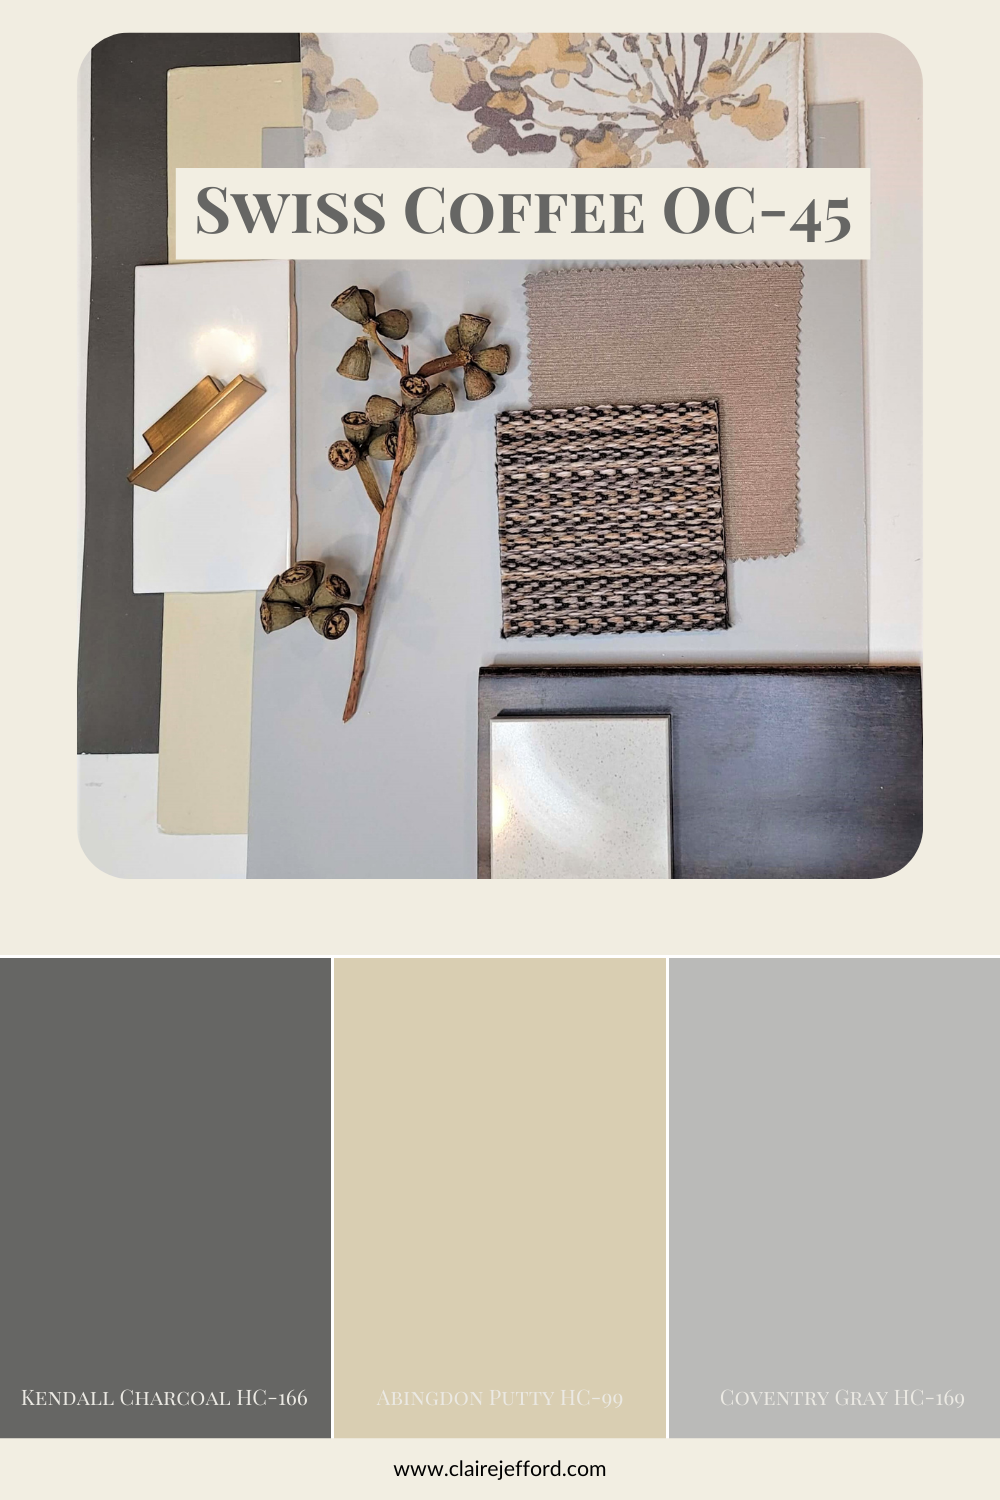 Swiss Coffee Palette Inspiration
Kendall Charcoal
Abingdon Putty
Conventry Gray